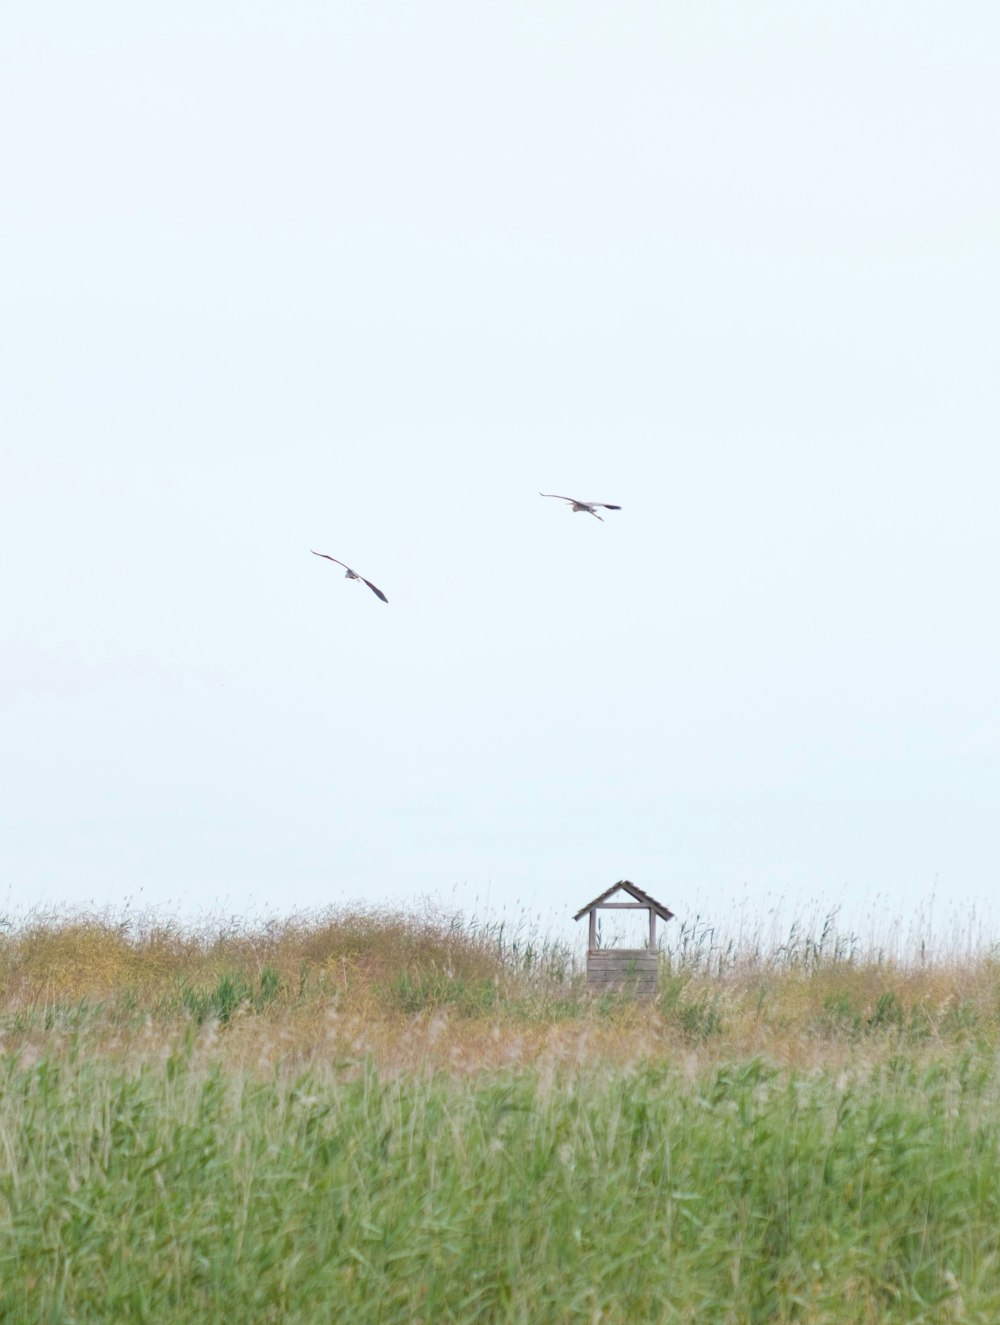 two birds flying over a bird house in a field